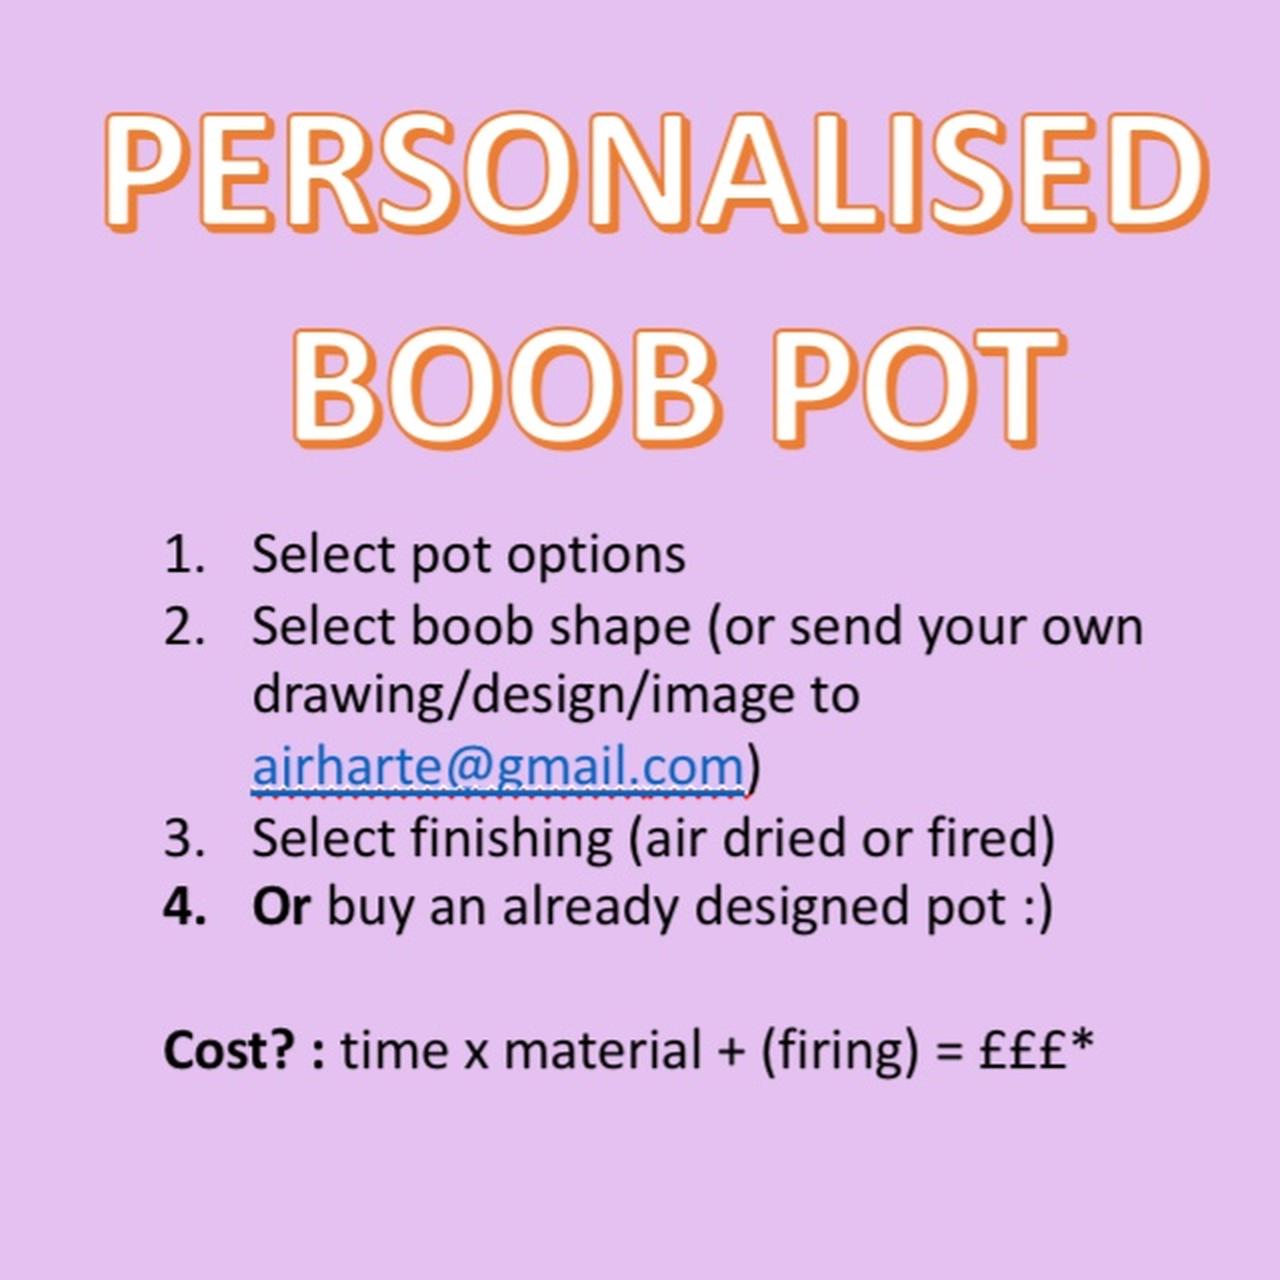 PERSONALISED BOOB POTS AVAILABLE! Look at the - Depop